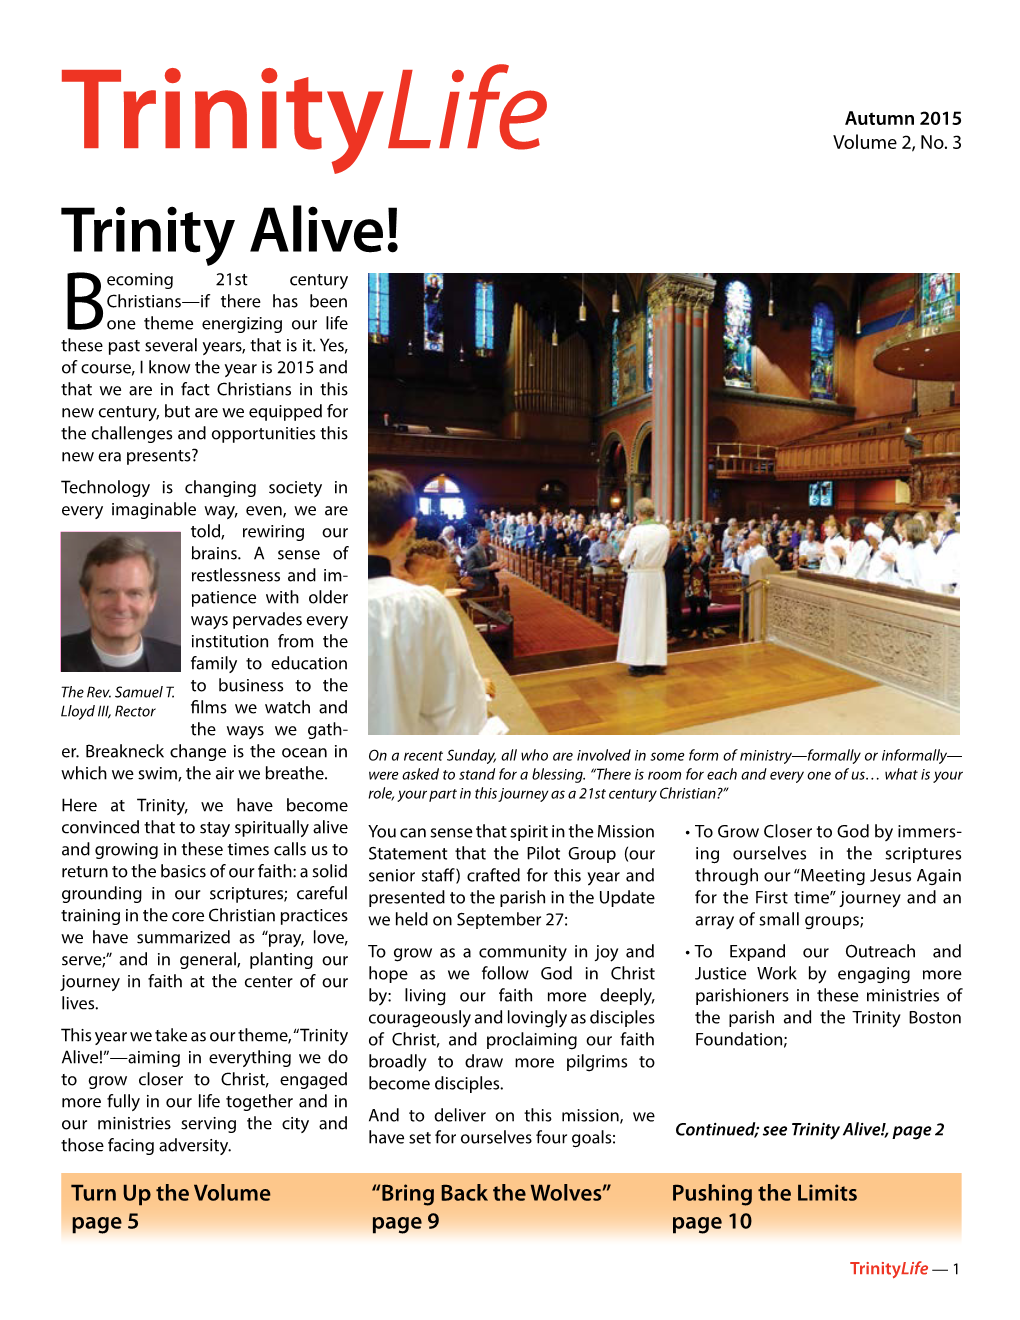 Trinity Alive! Ecoming 21St Century Christians—If There Has Been Bone Theme Energizing Our Life These Past Several Years, That Is It